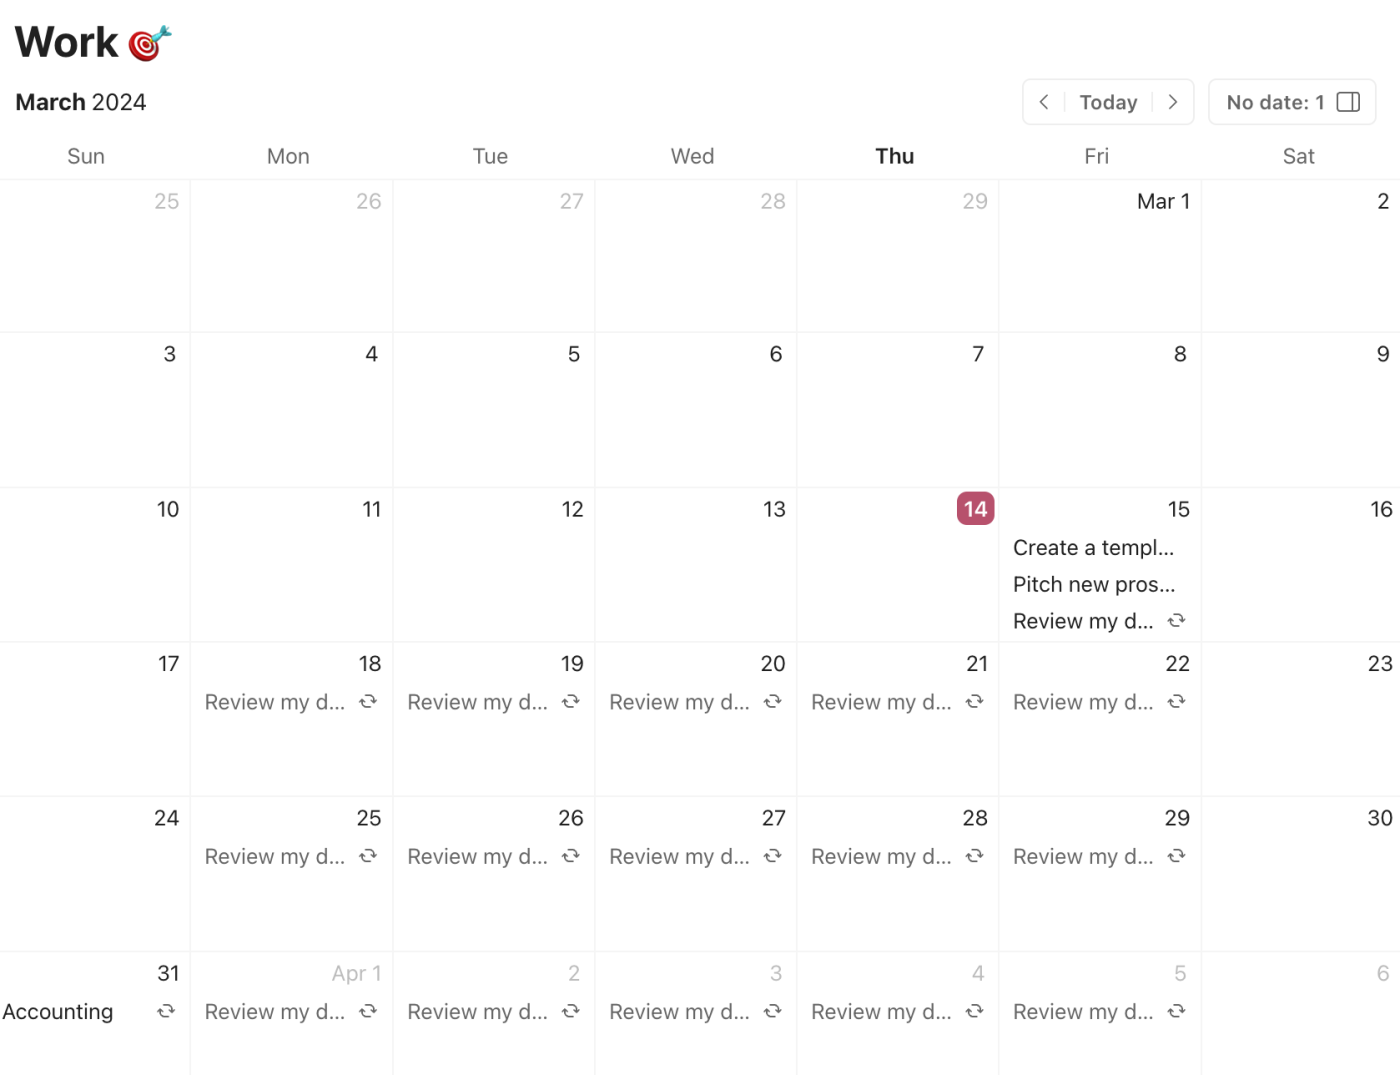 The calendar view in Todoist